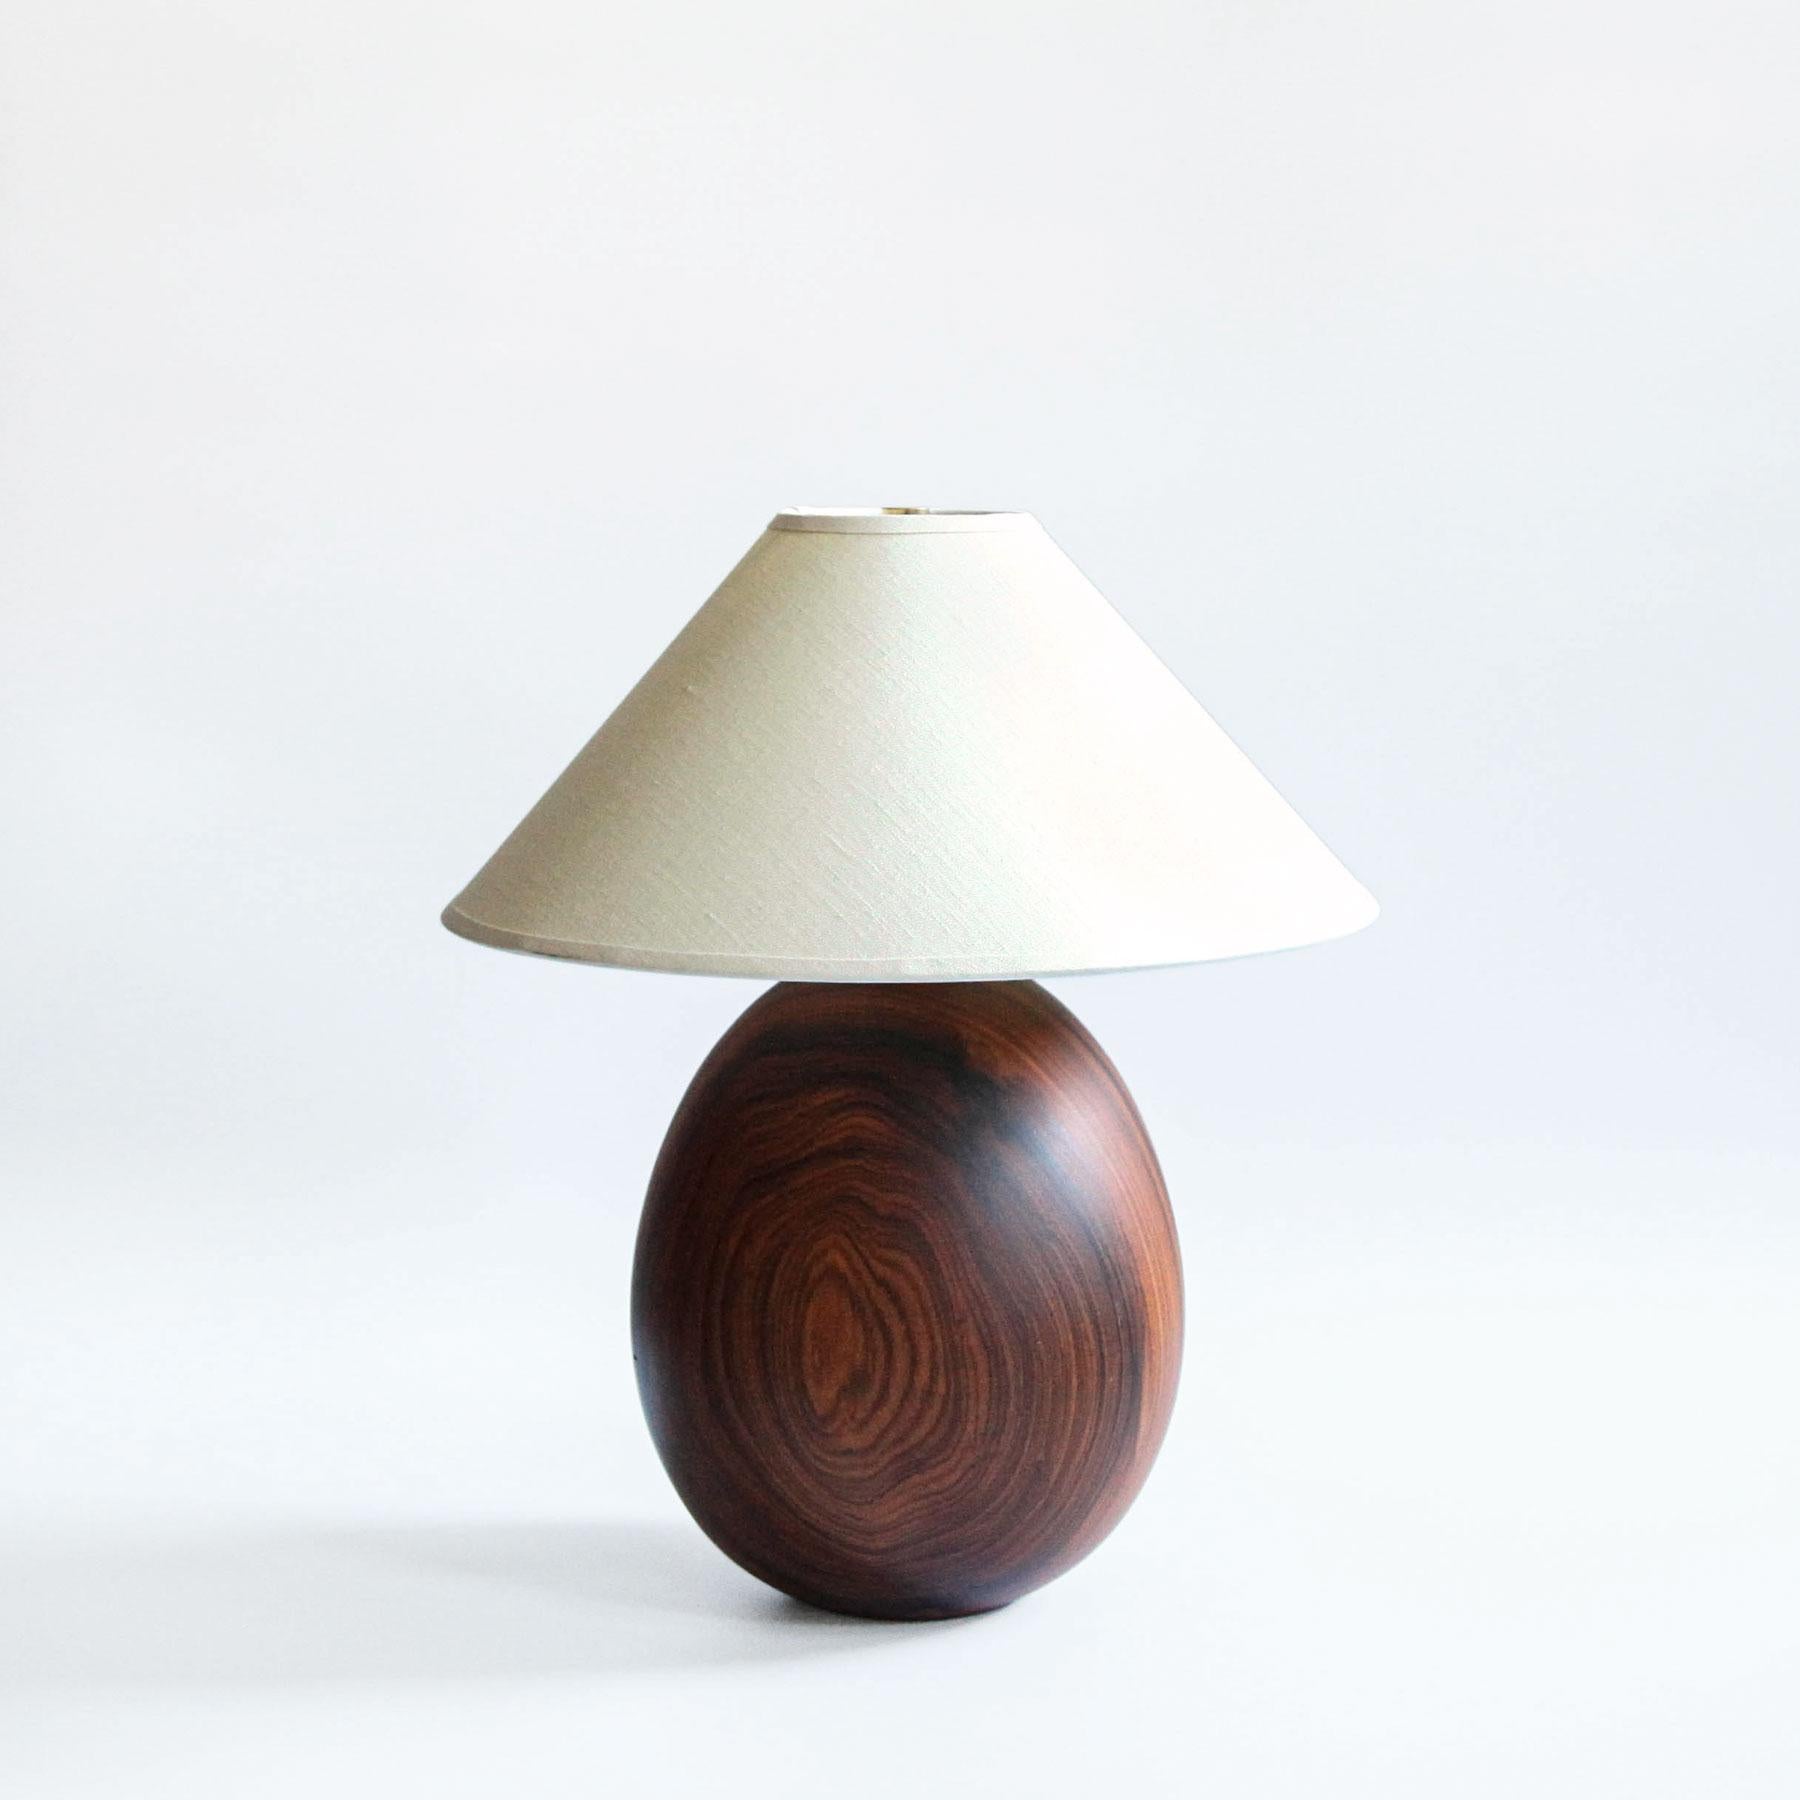 The Árbol collection is an embrace of tropical modernism, each lamp is composed of salvaged tropical hardwoods from the Bolivian city of Santa Cruz, where trees that are felled by natural causes—or for construction—are rescued by our team. A blend